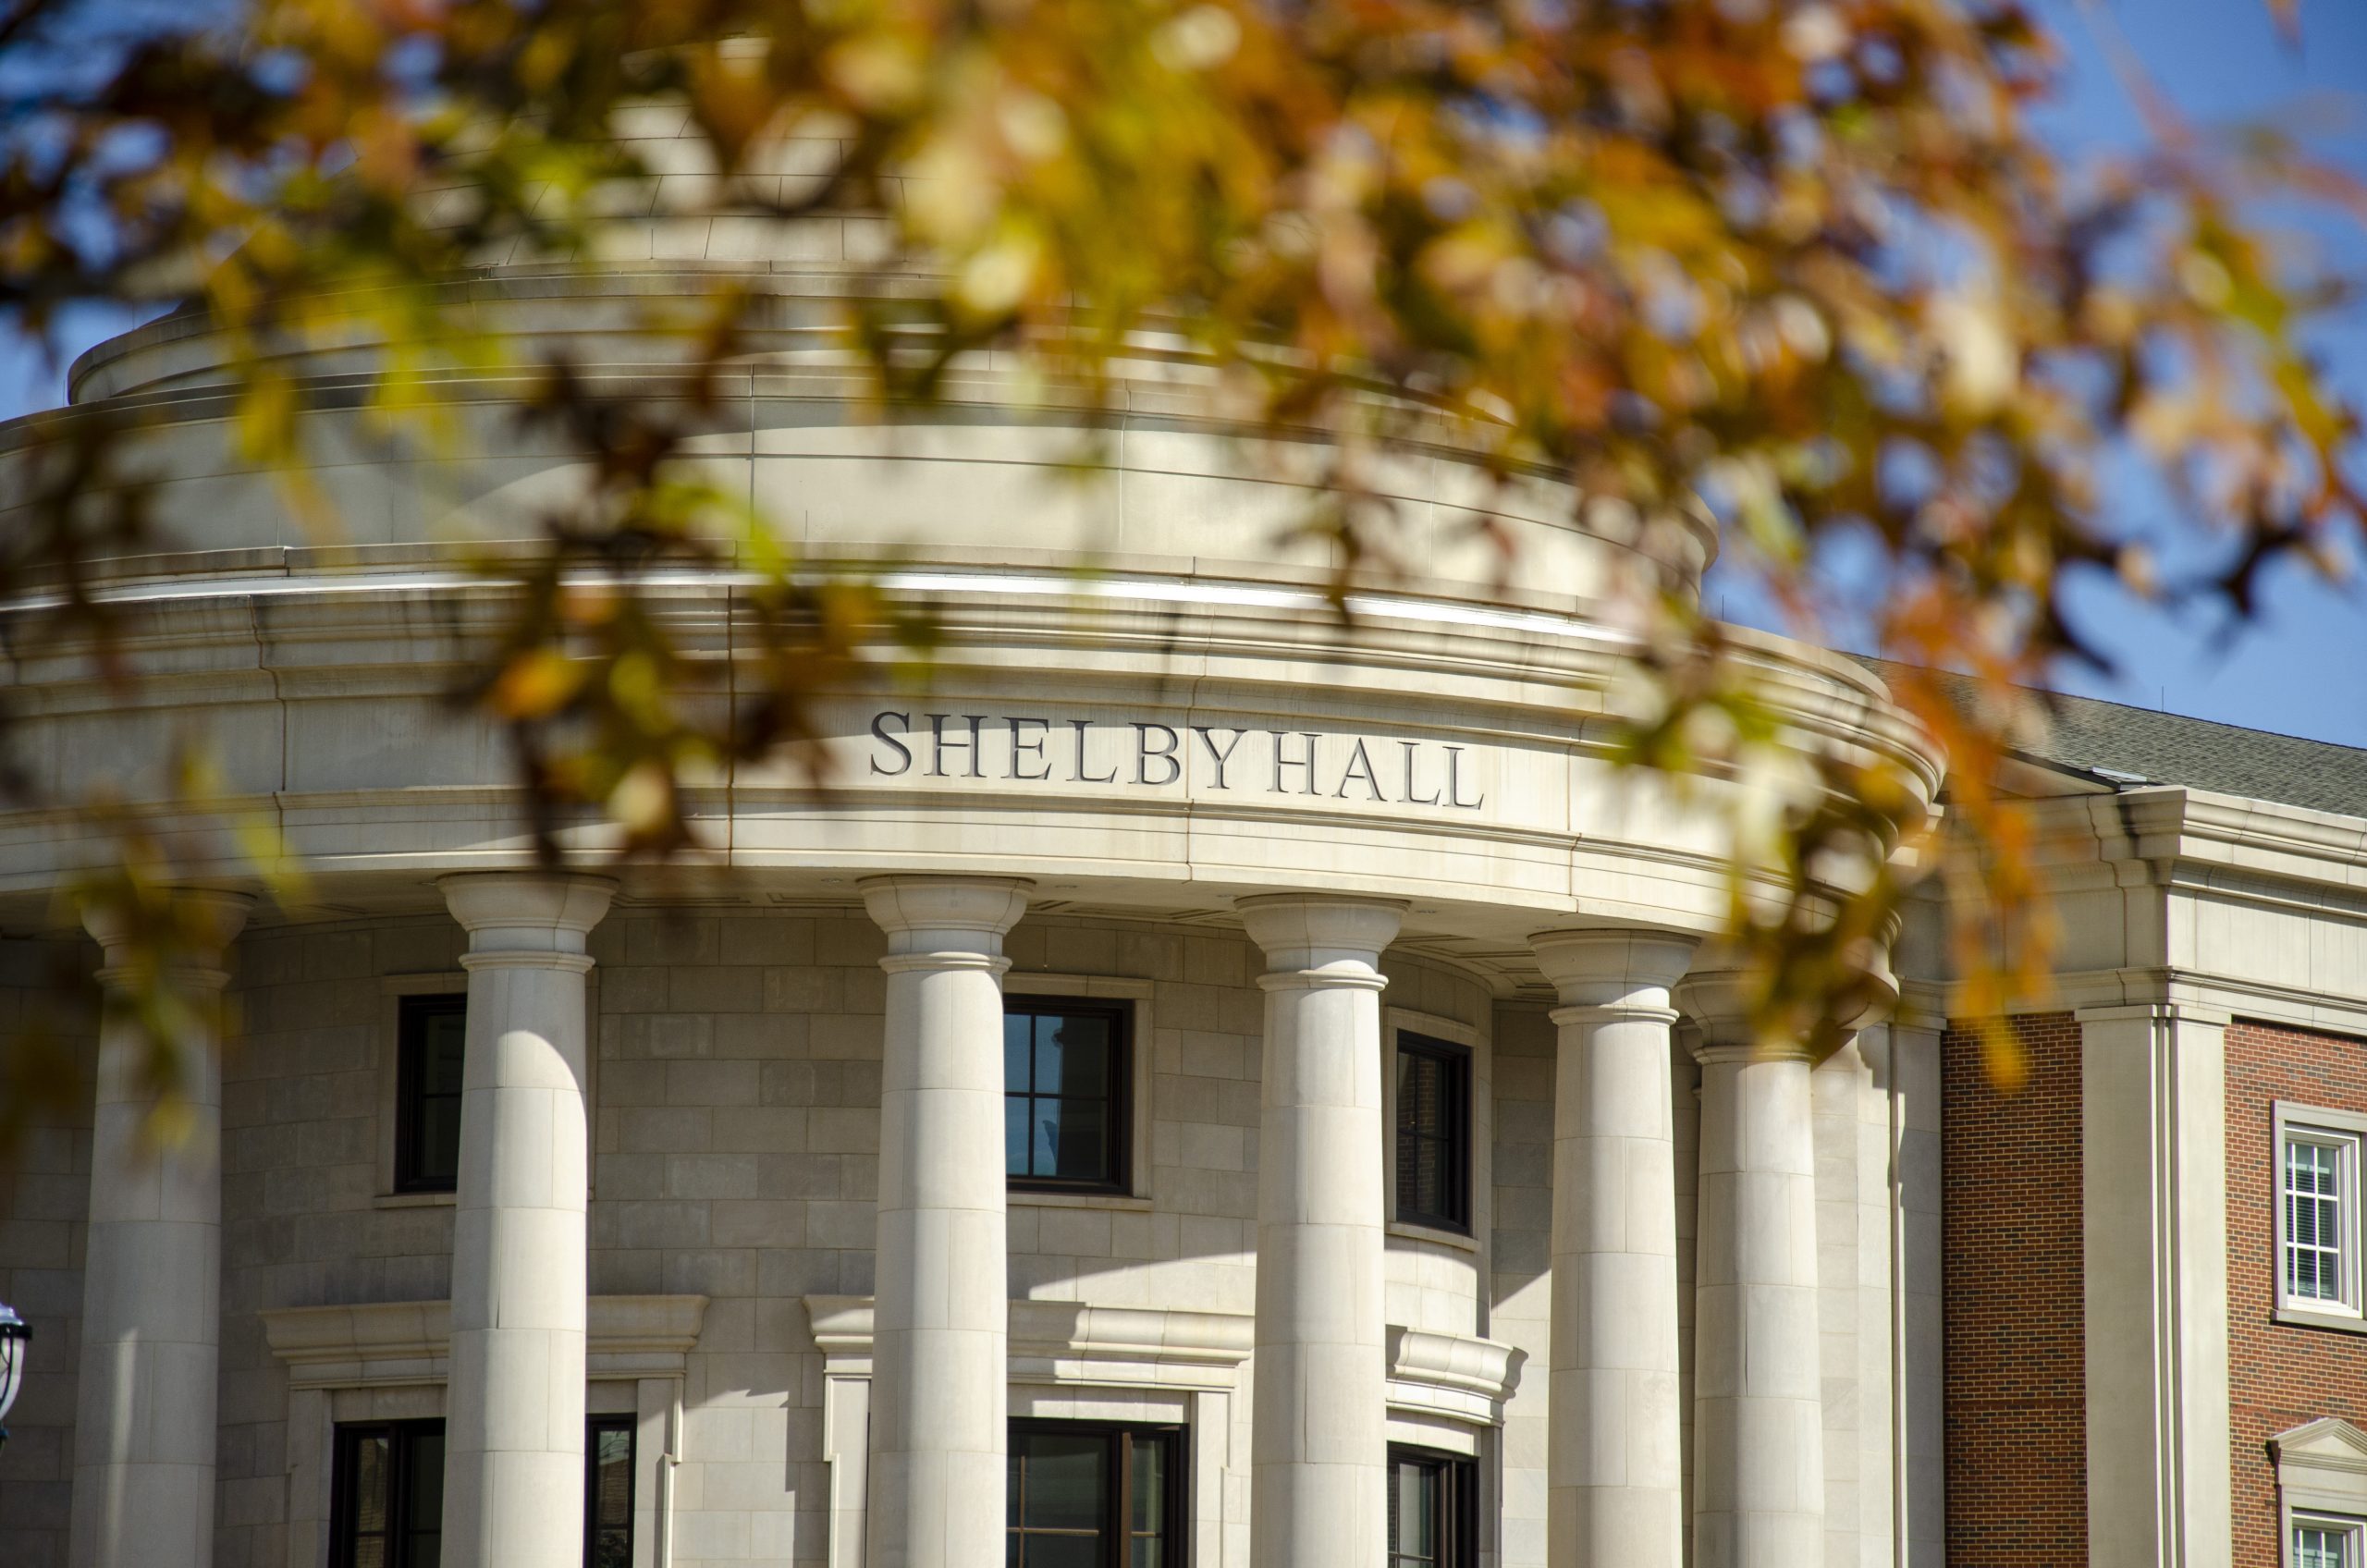 Shelby Hall exterior